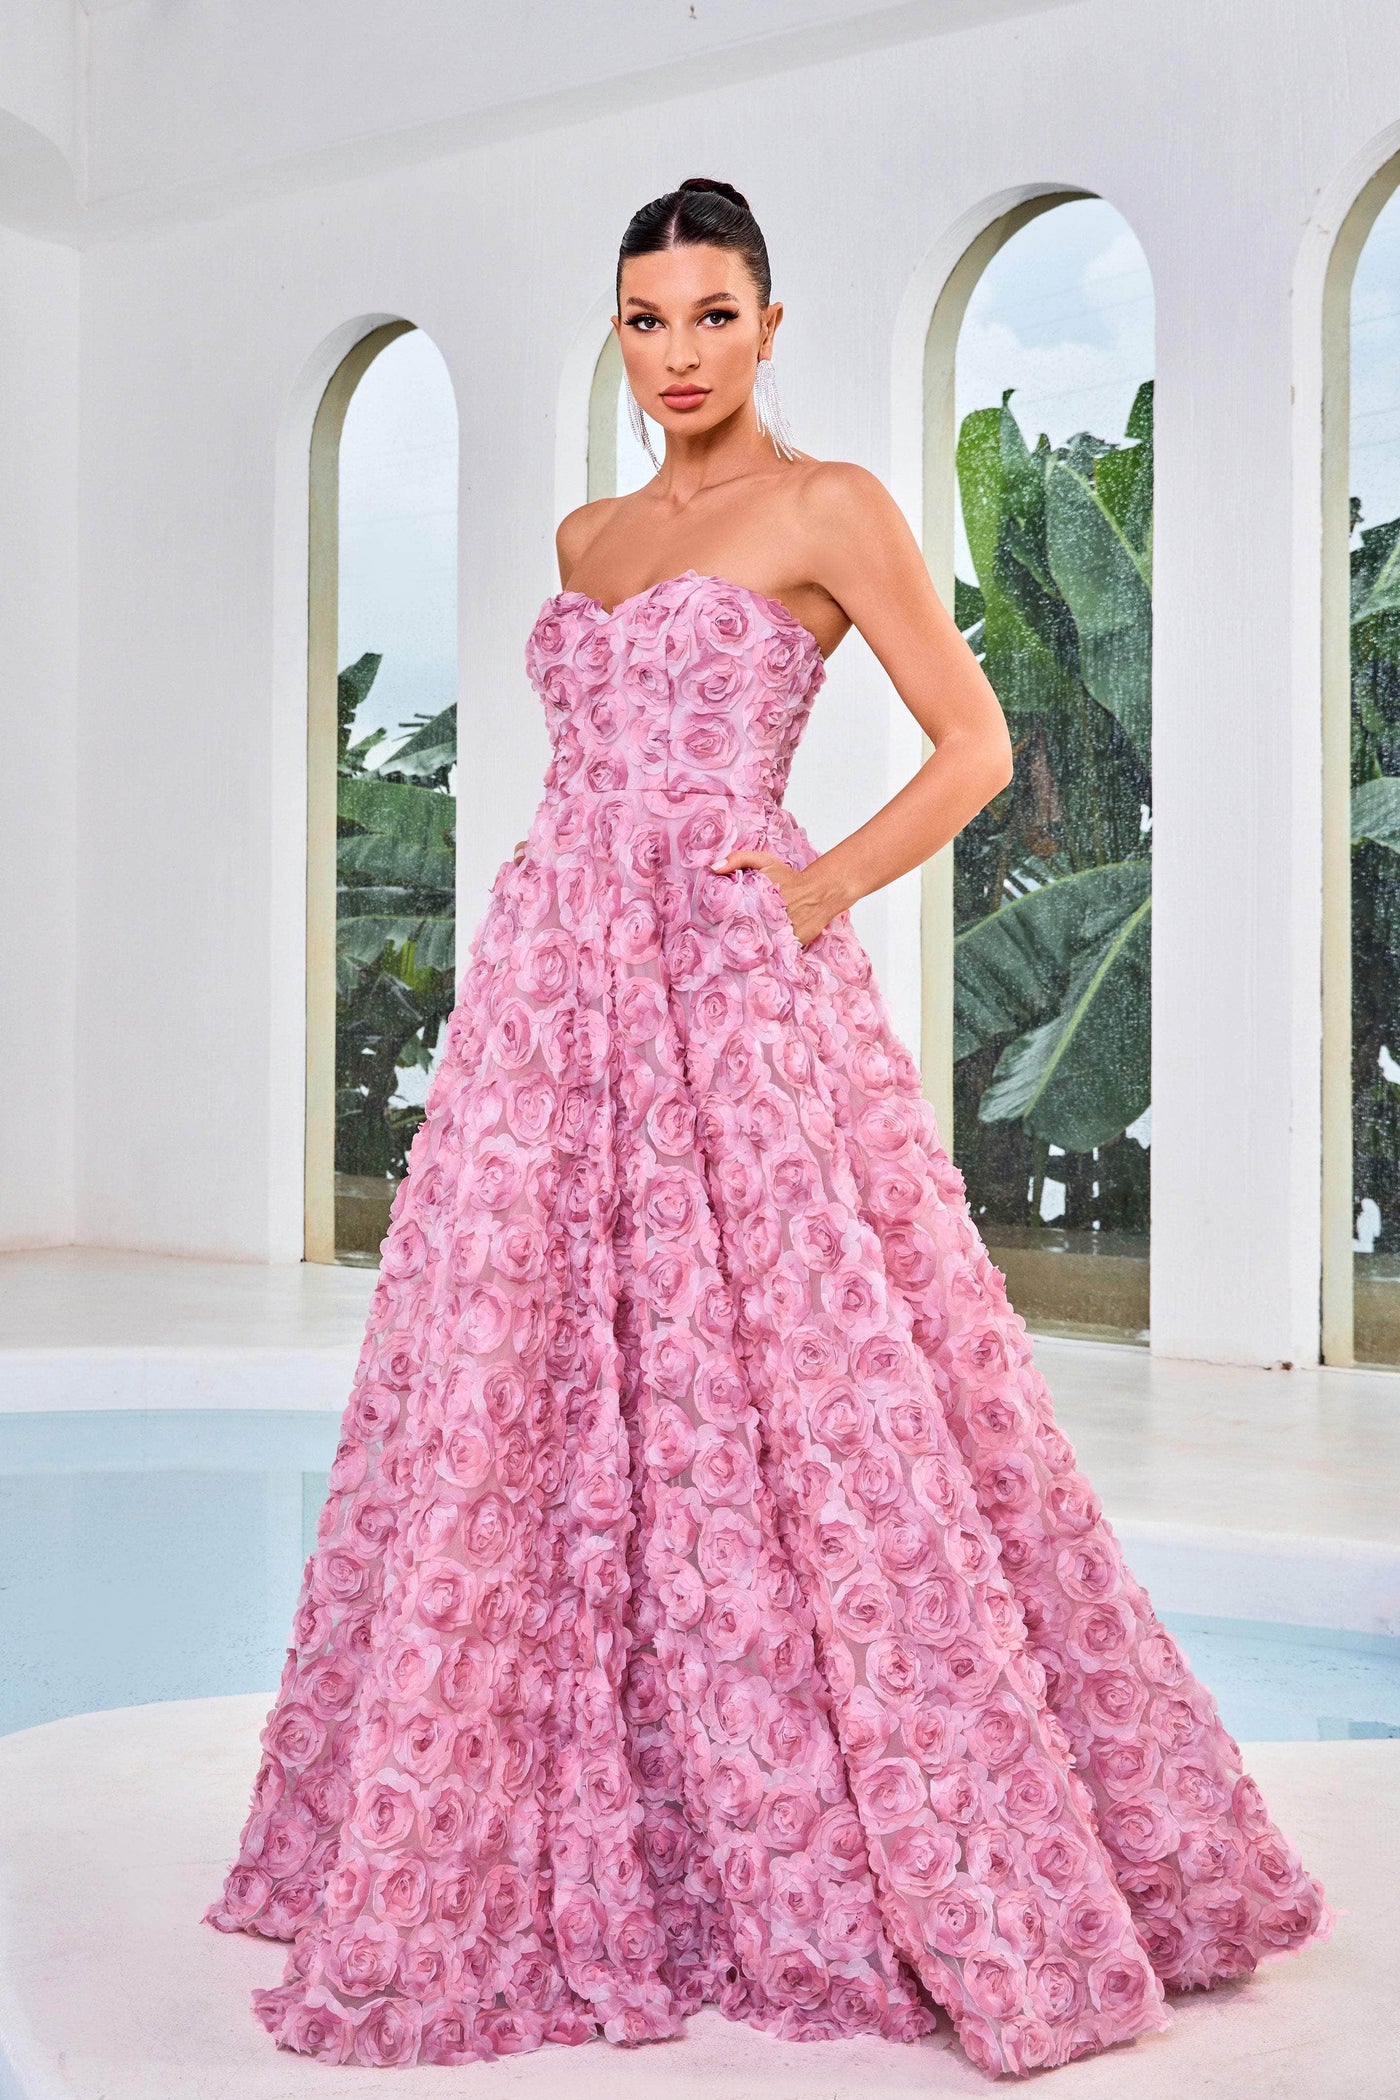 J'Adore Dresses J24026 - Sweetheart Floral Prom Dress Special Occasion Dresses